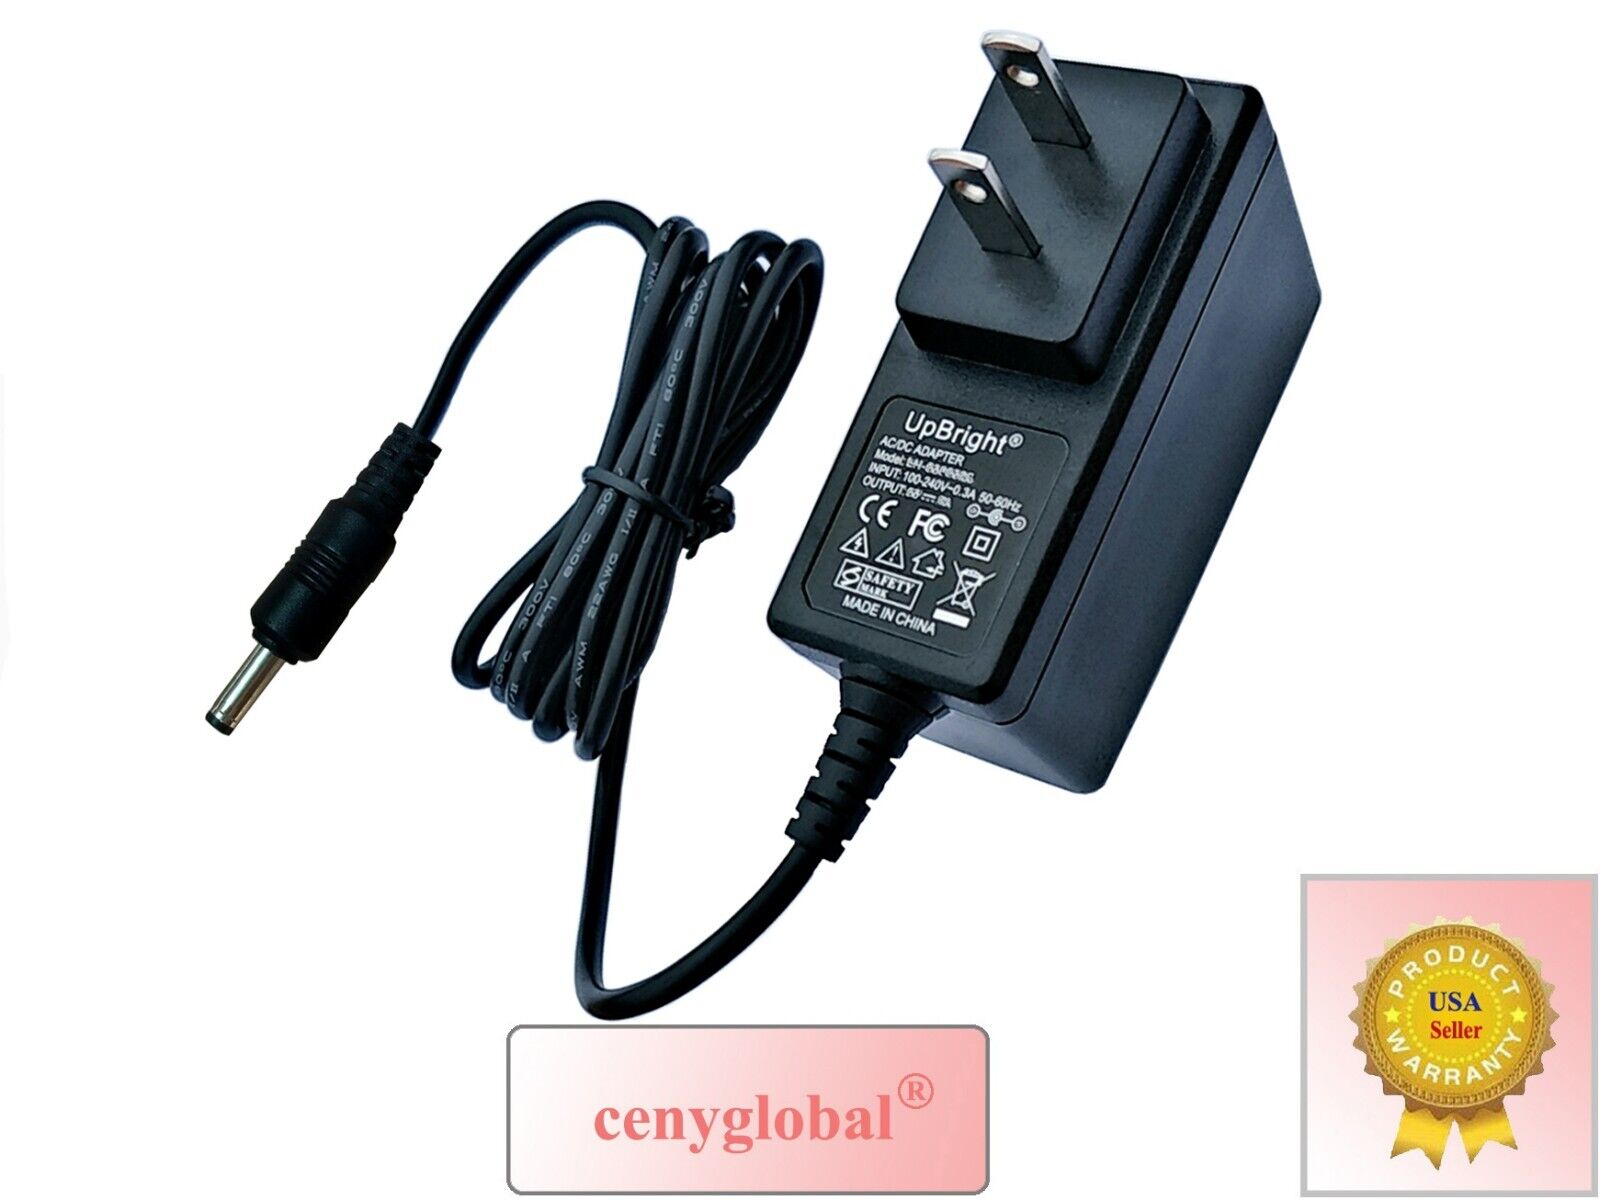 12V AC Adapter For ICOM VHF UHF Transceiver Radio IC Series Power Supply Charger